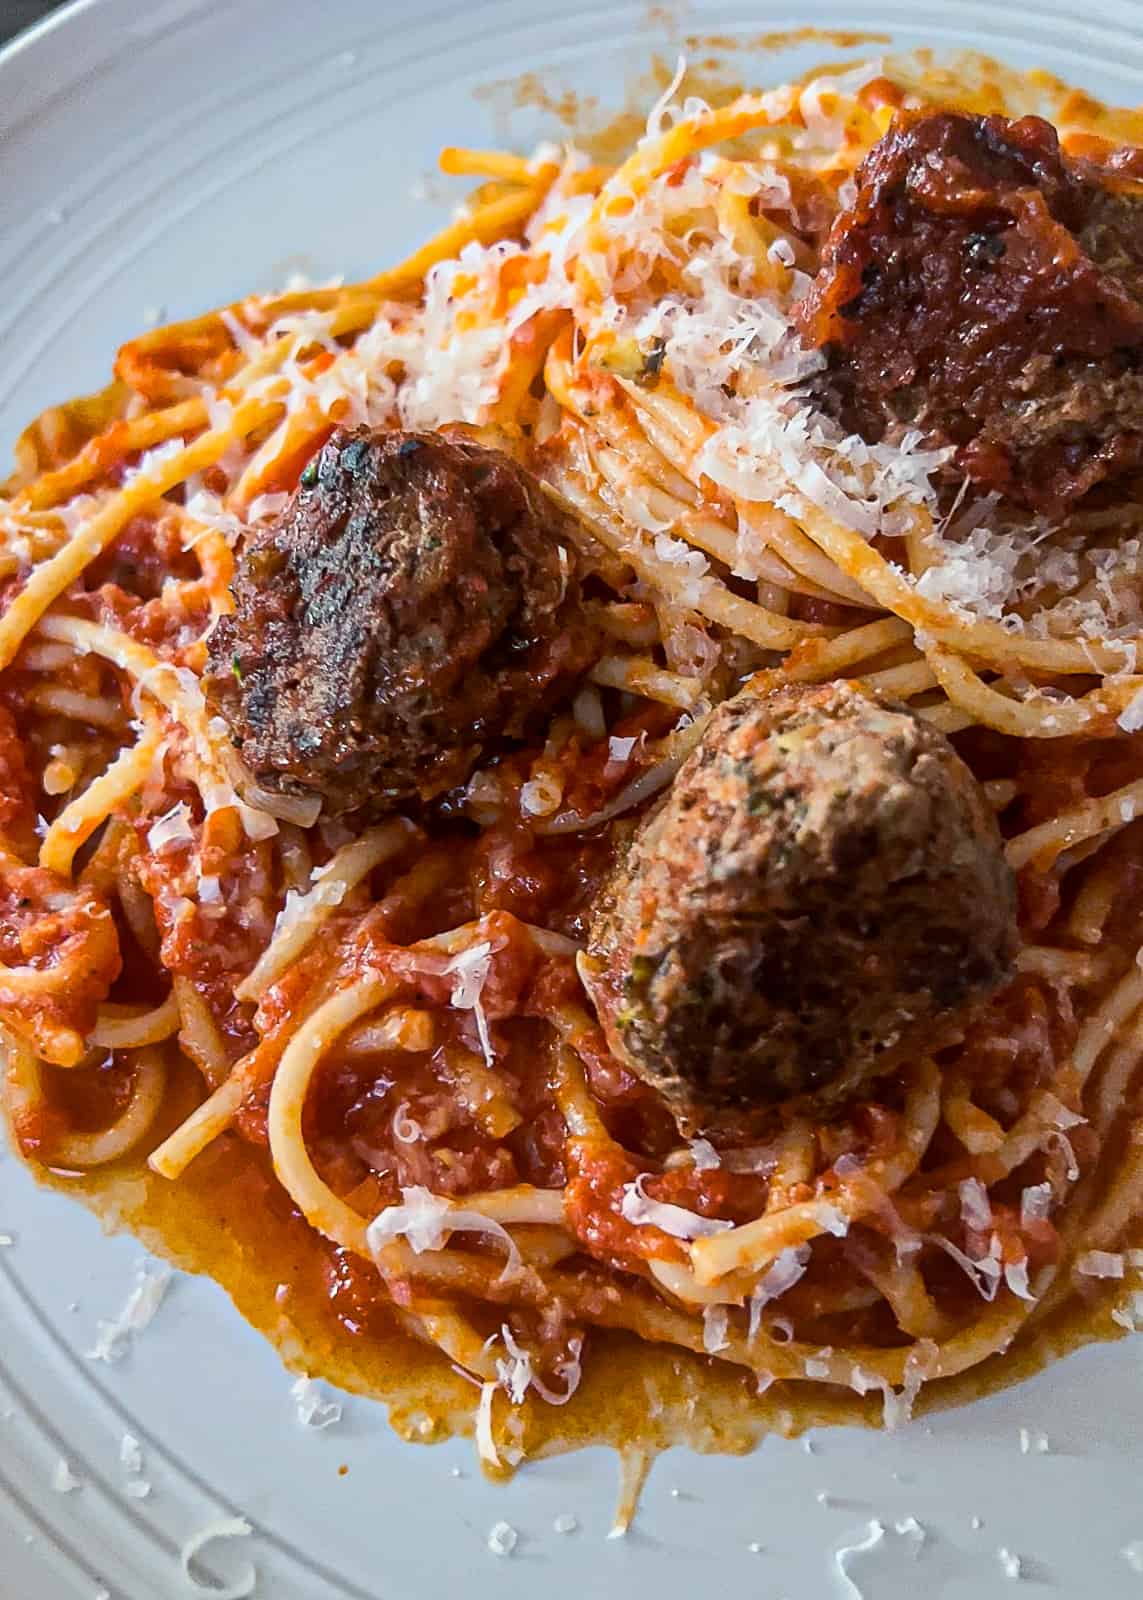 cooked veggie and ground beef meatballs with spaghetti and parmesan cheese on a dinner plate